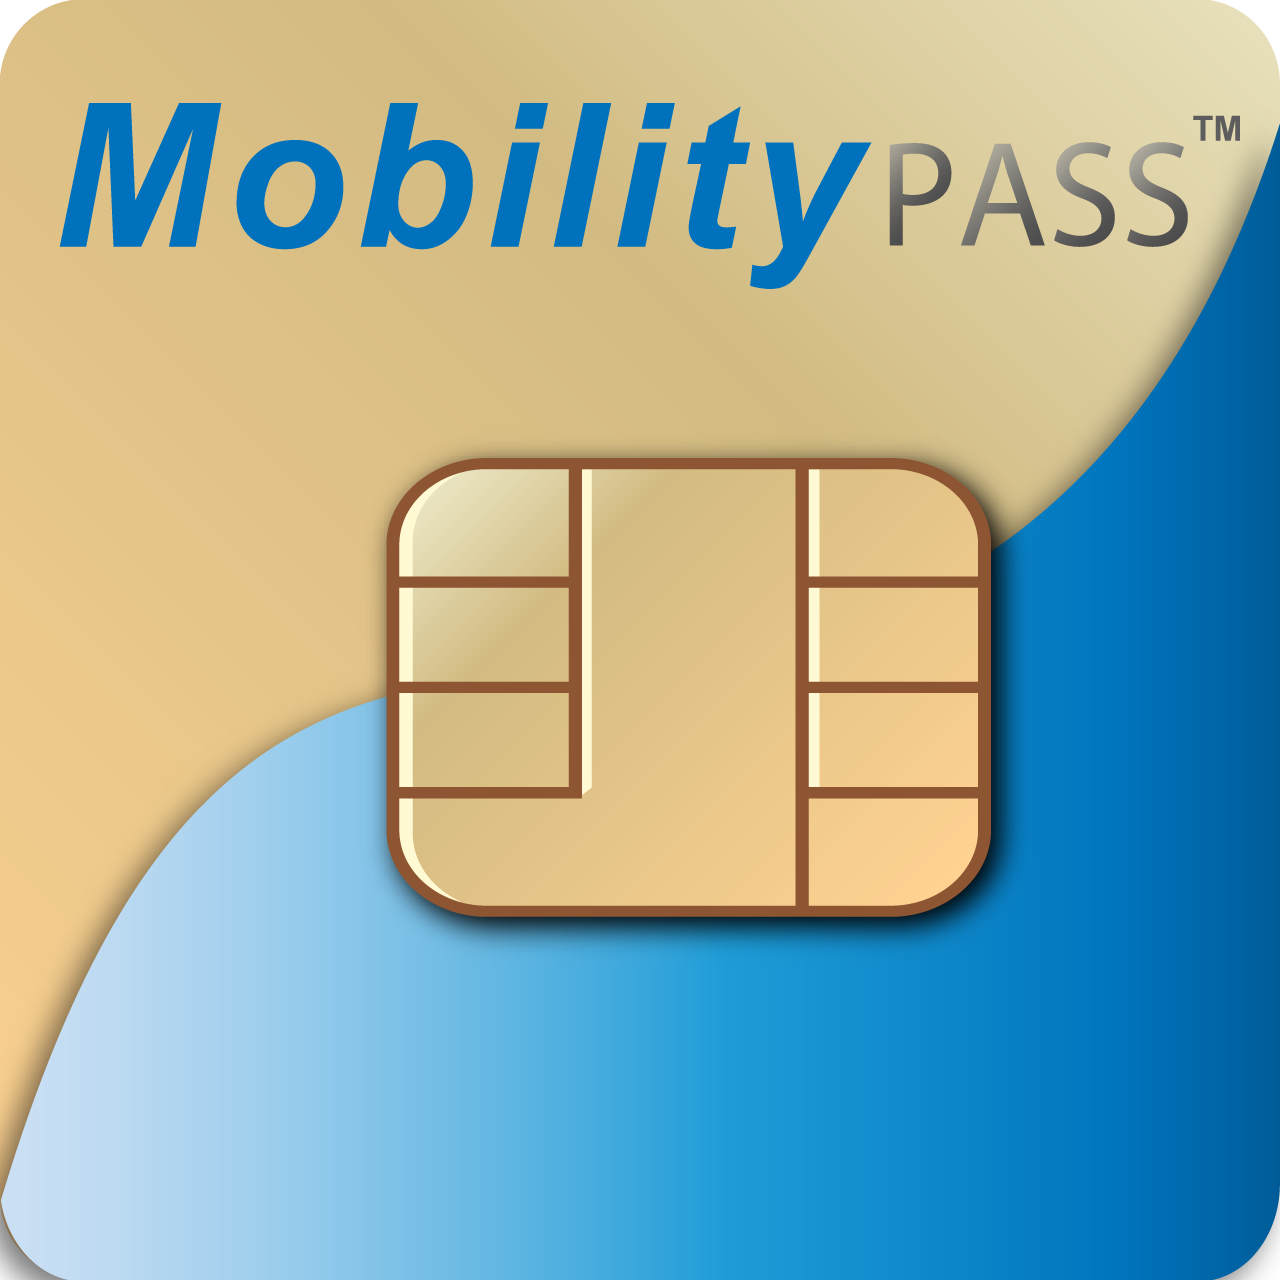 MobilityPass Roaming official web